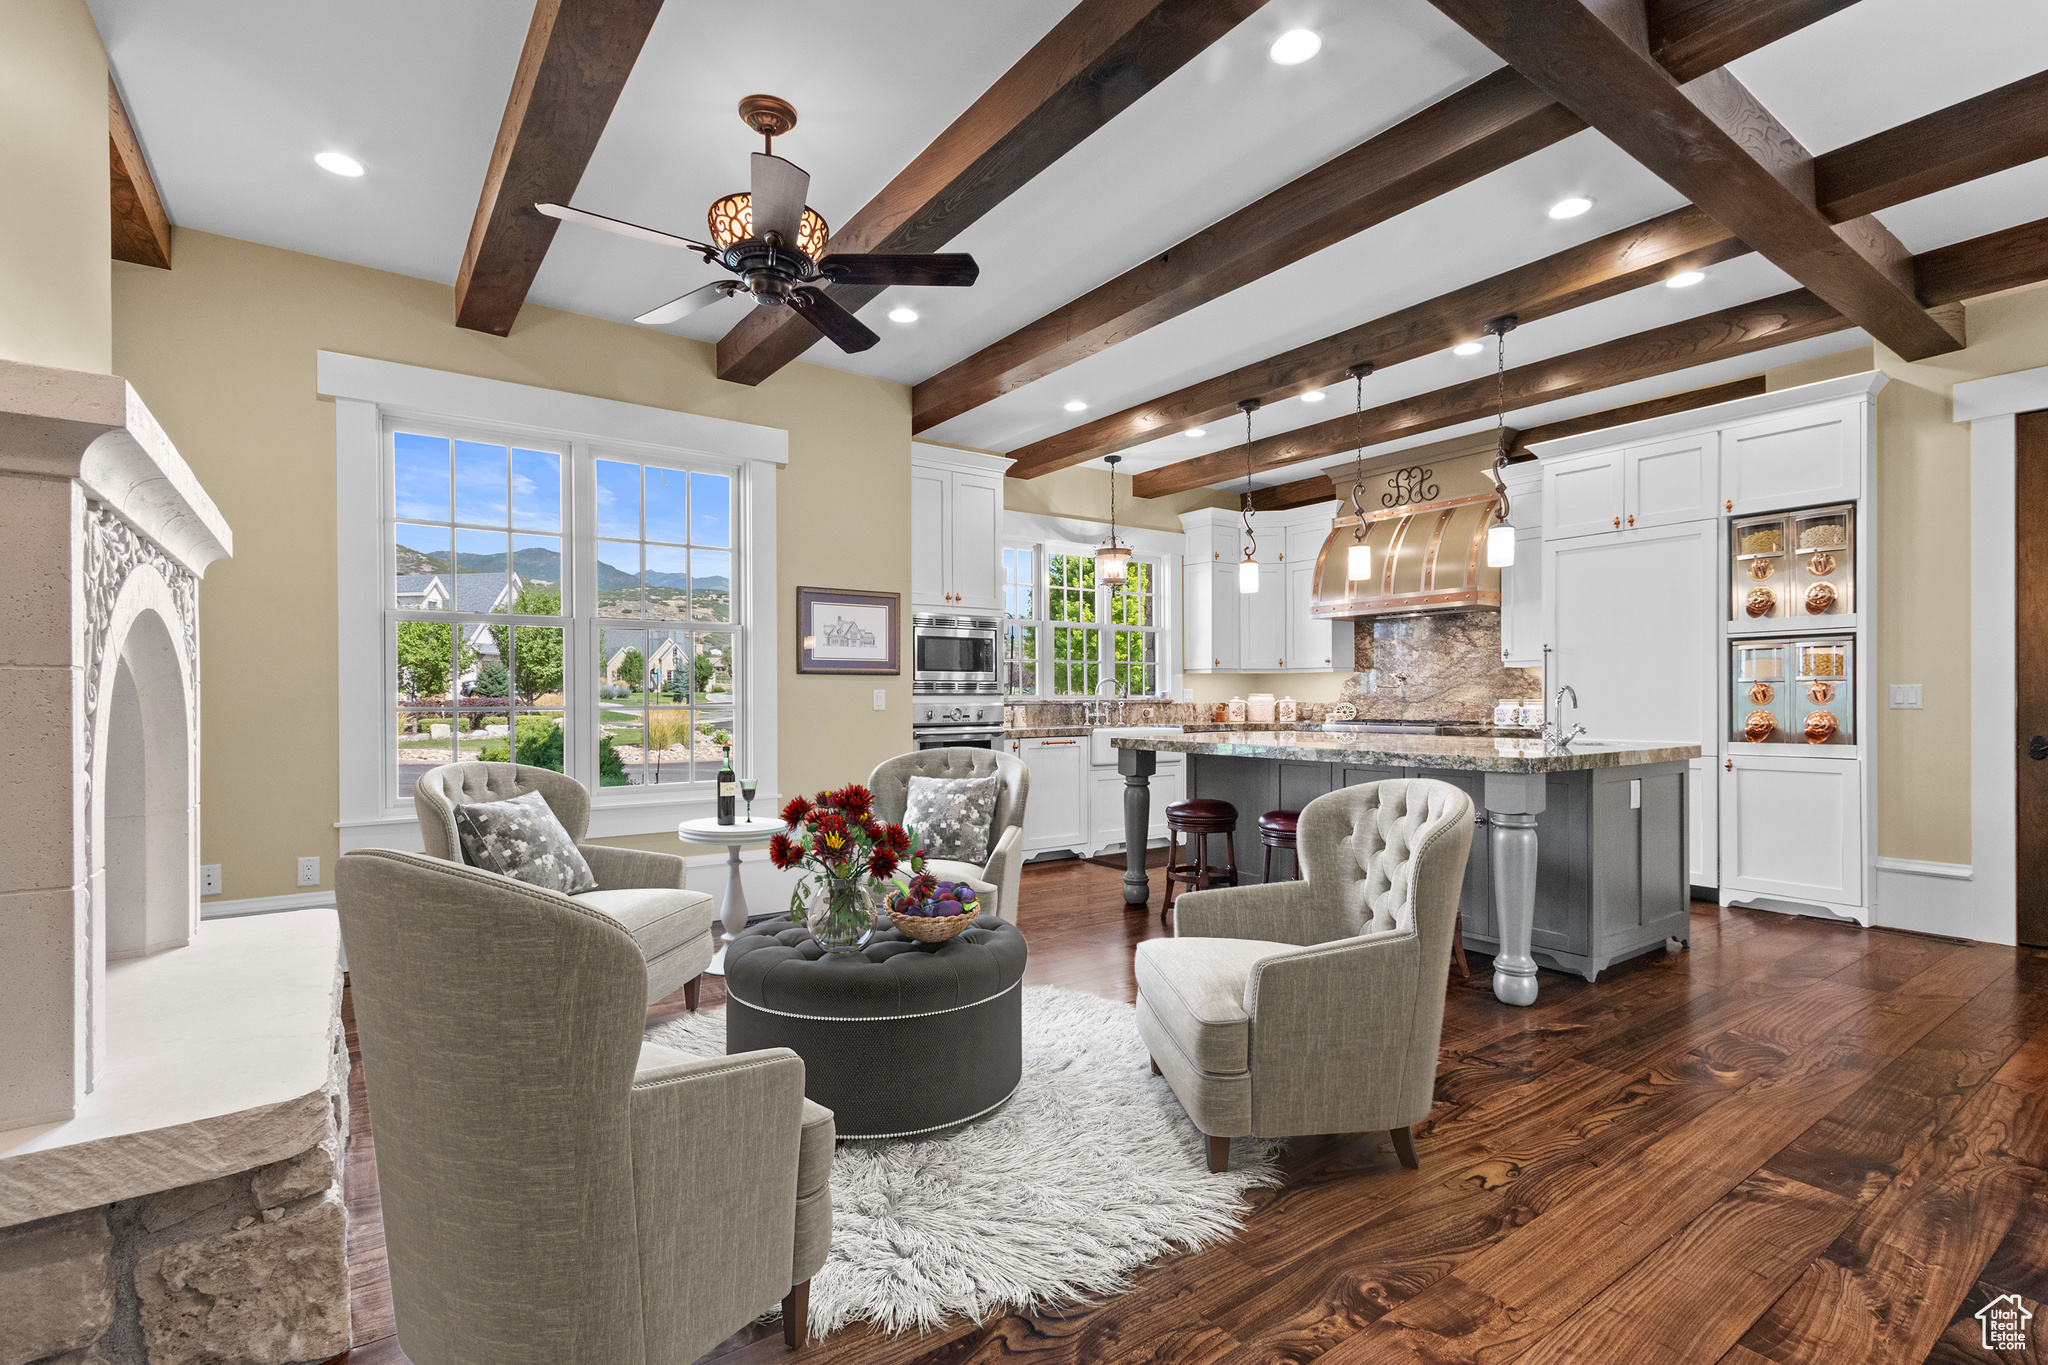 Living room with dark wood-type flooring, beamed ceiling, and ceiling fan